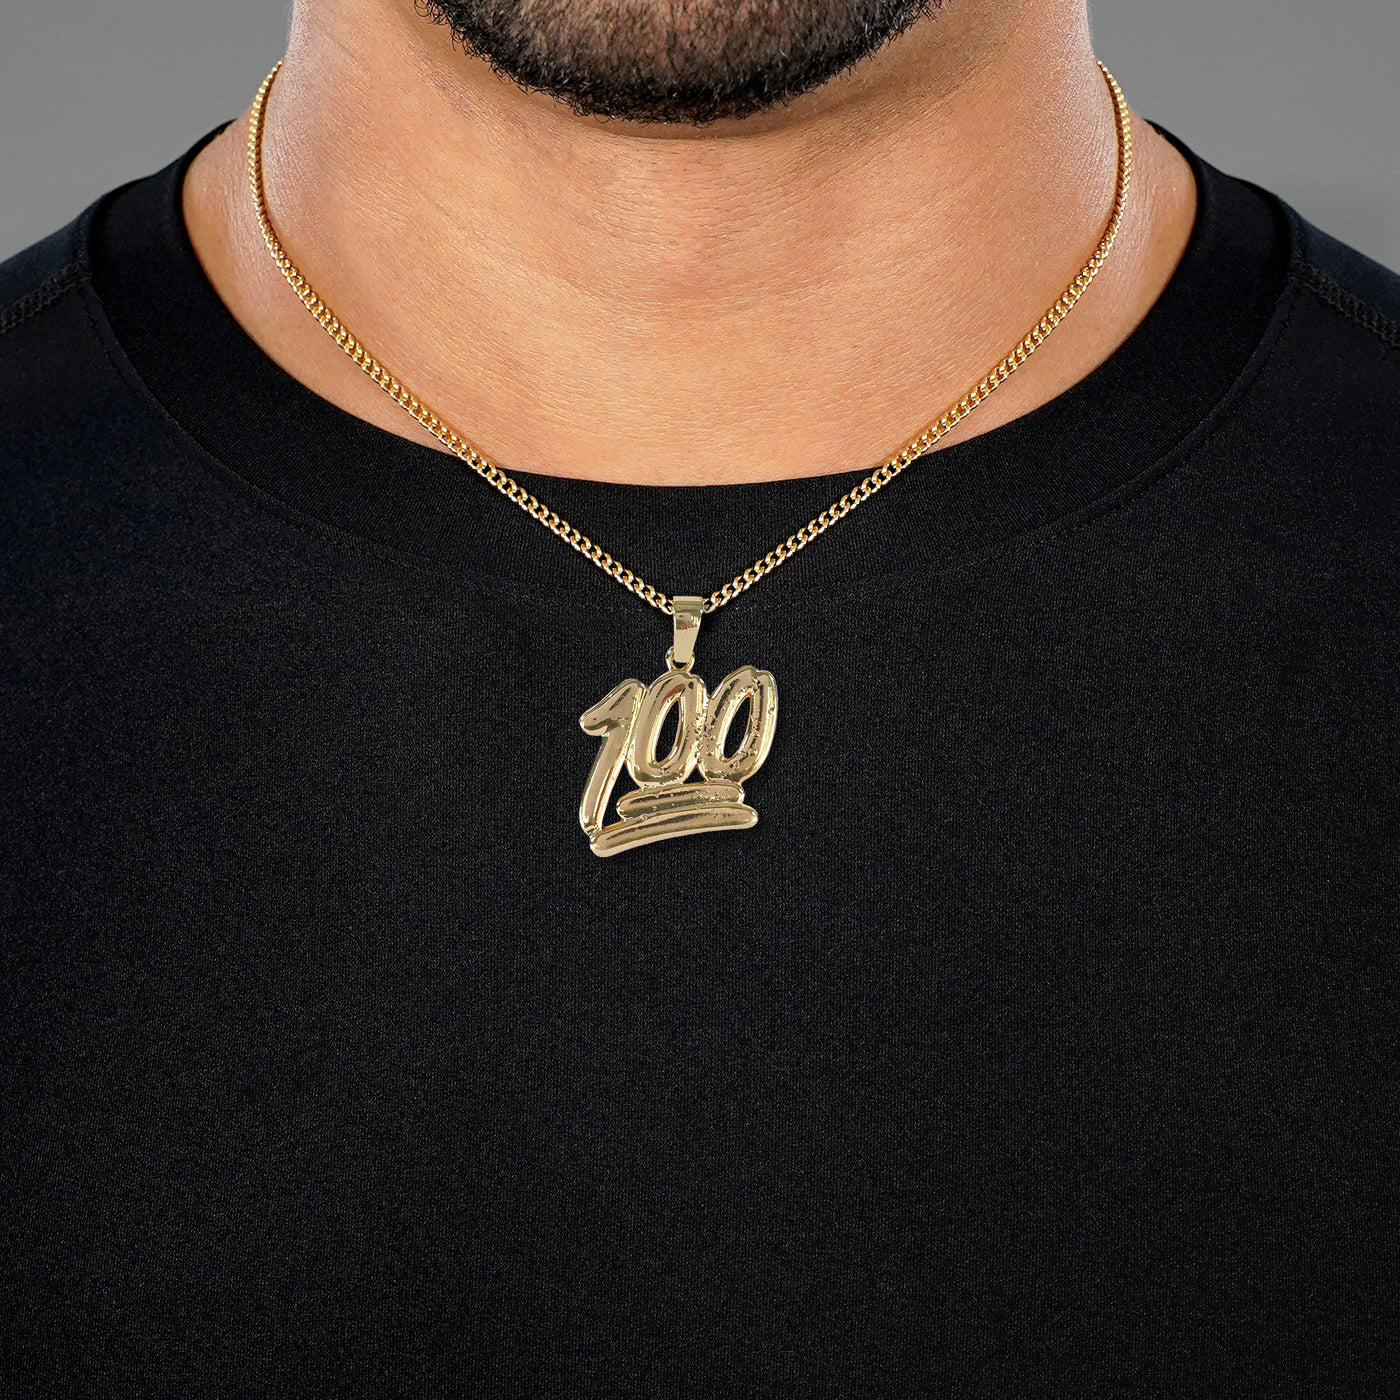 100 Emoticon 1¾" Pendant with Chain Necklace - Gold Plated Stainless Steel